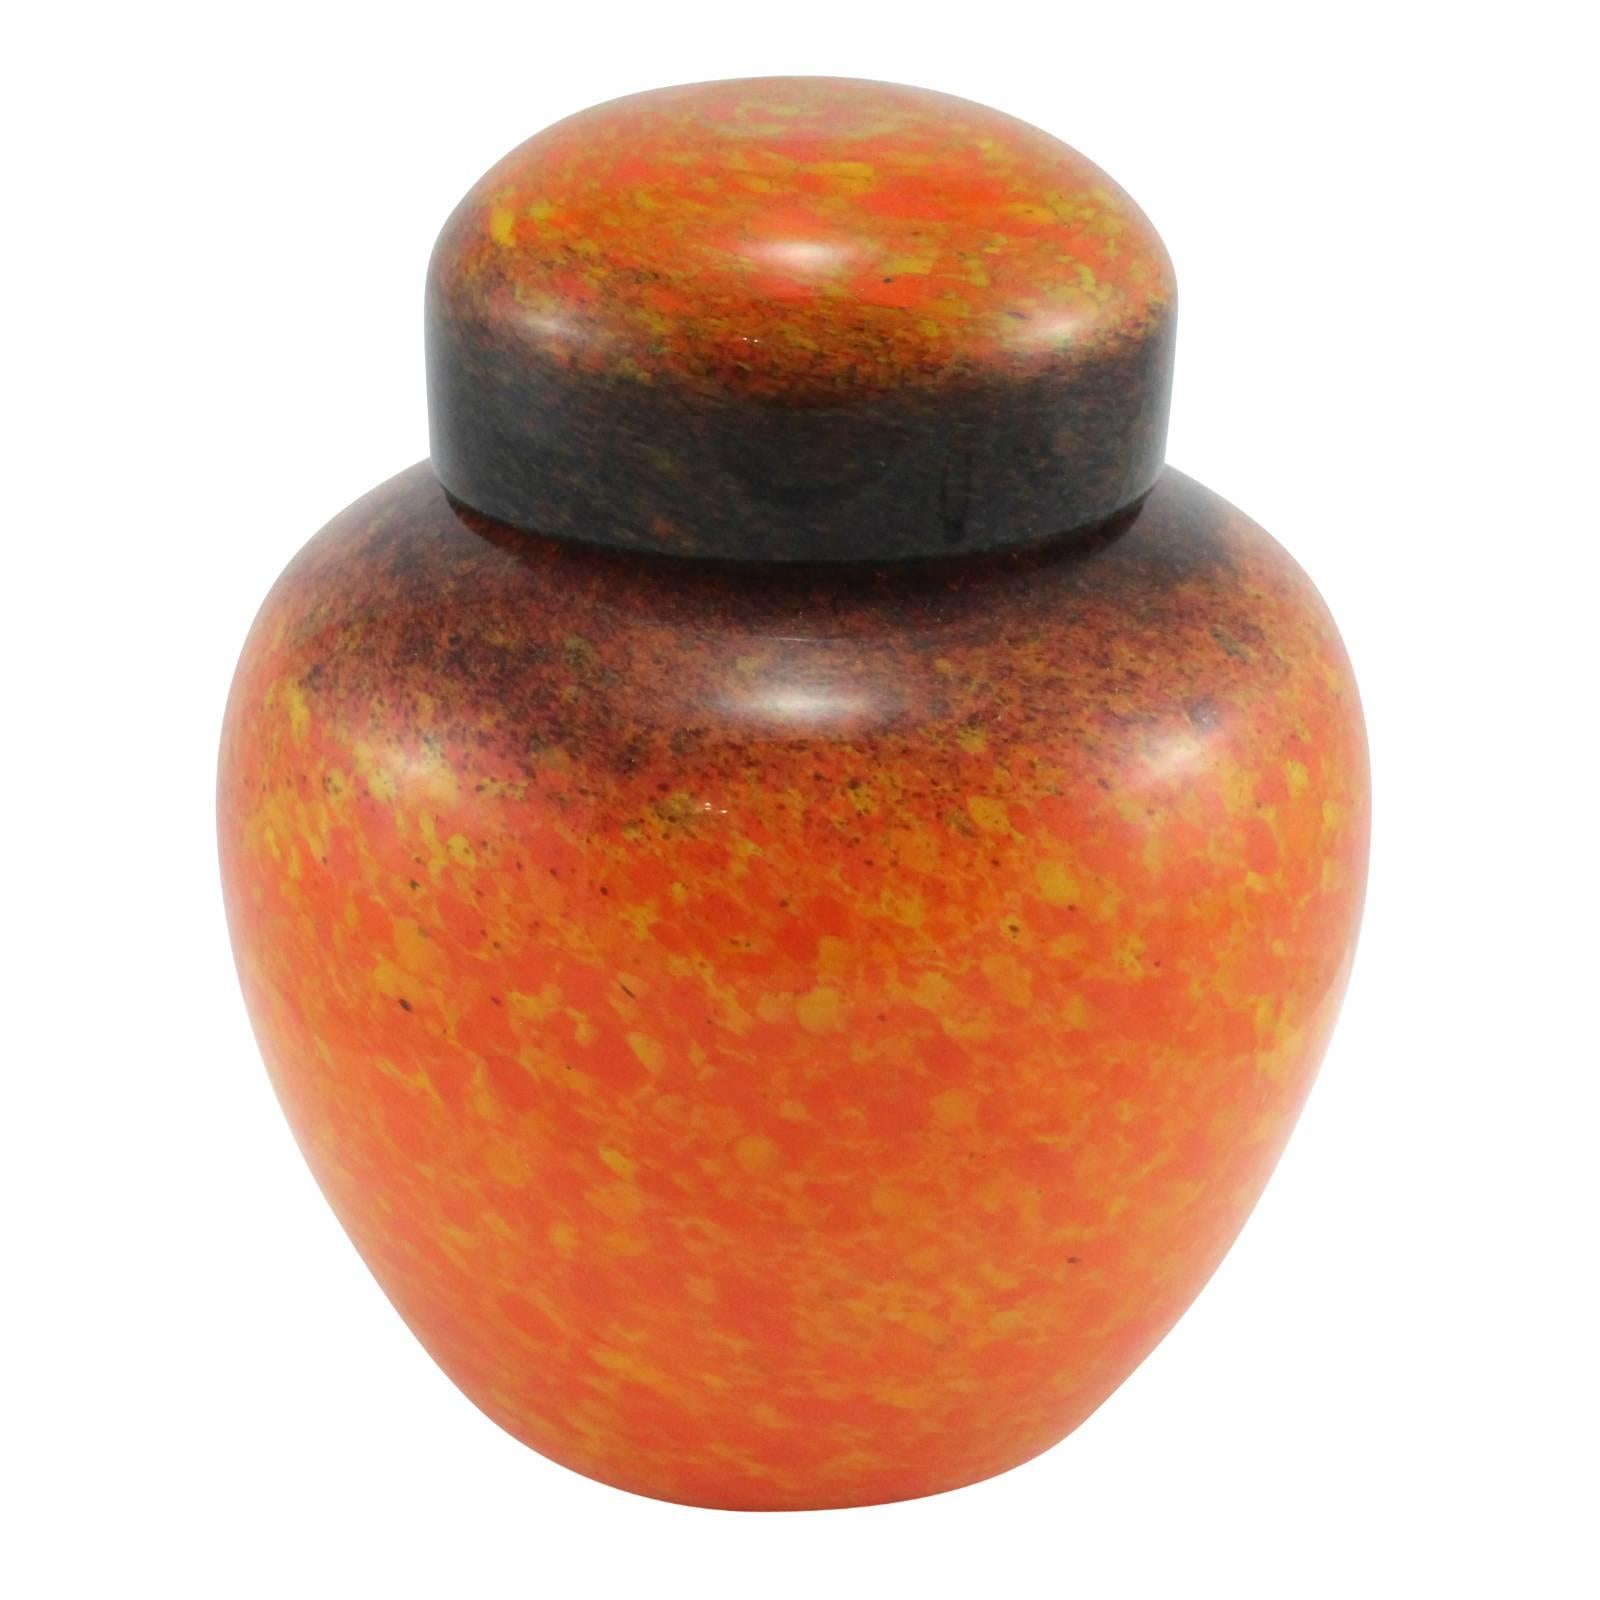 An early 20th century Art Deco orange, yellow, black and brown Monart glass ginger jar by John Moncrieff Ltd. Catalogued as Color 68, shape Z, size III.

